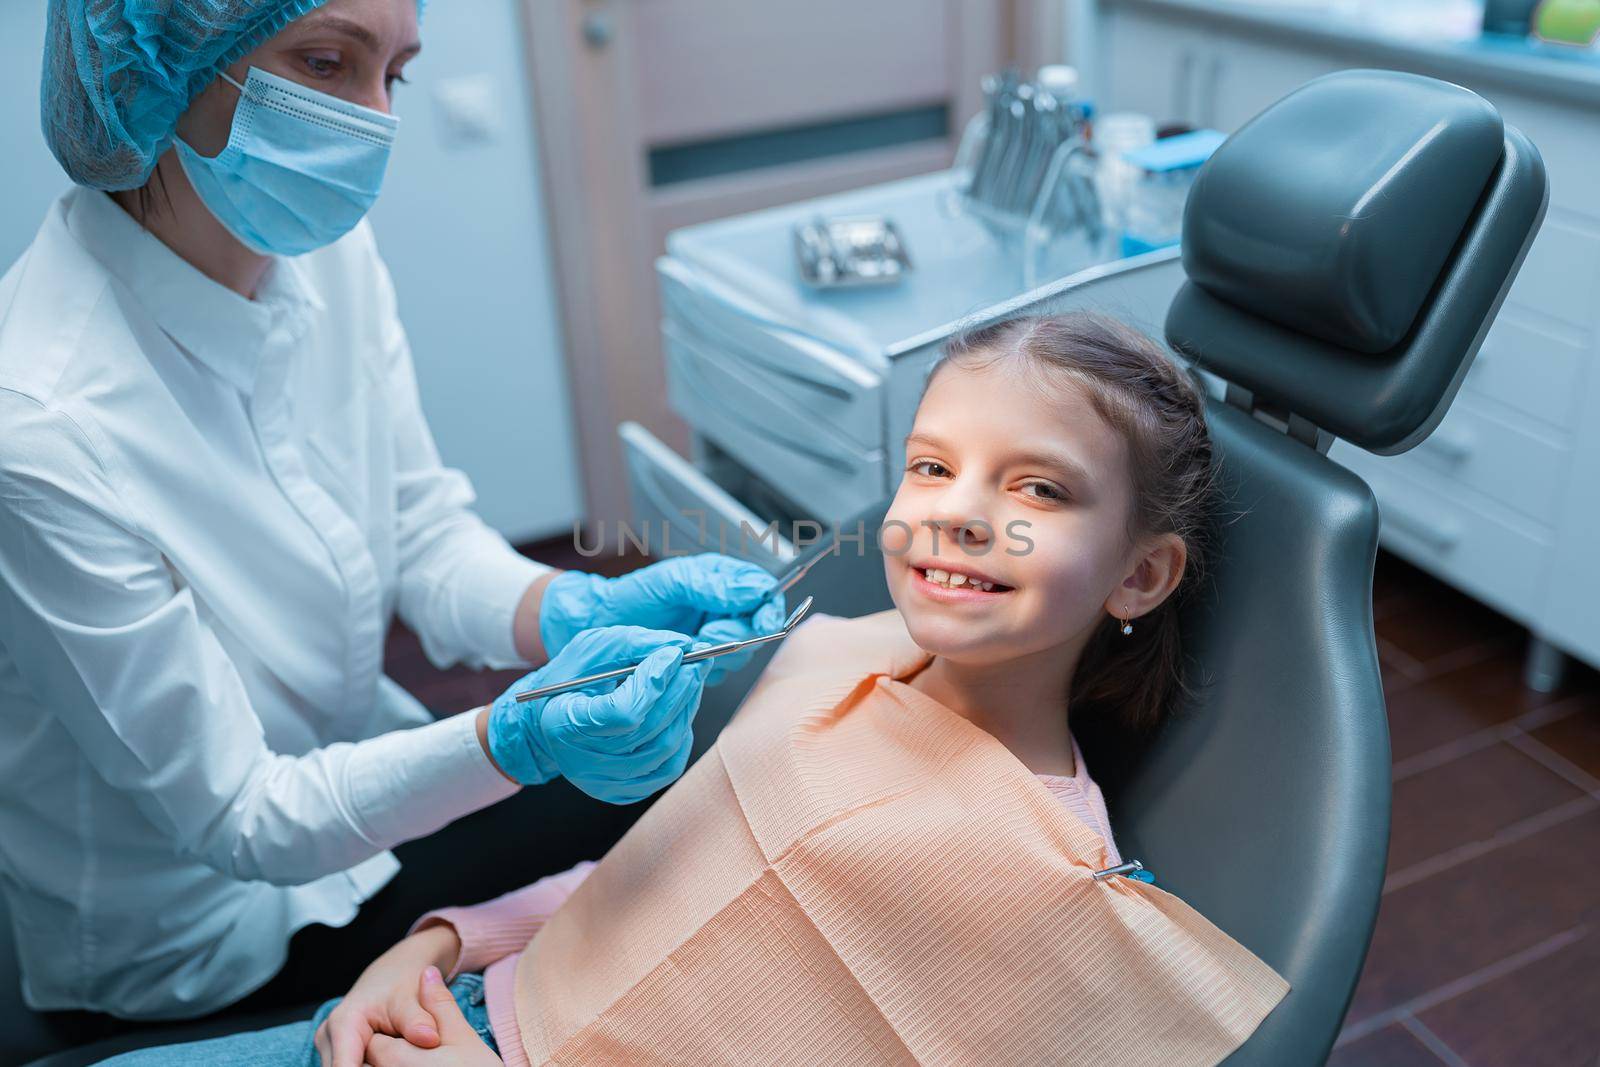 Cute young girl visiting dentist, having his teeth checked by female dentist in dental office by Studio_SOK